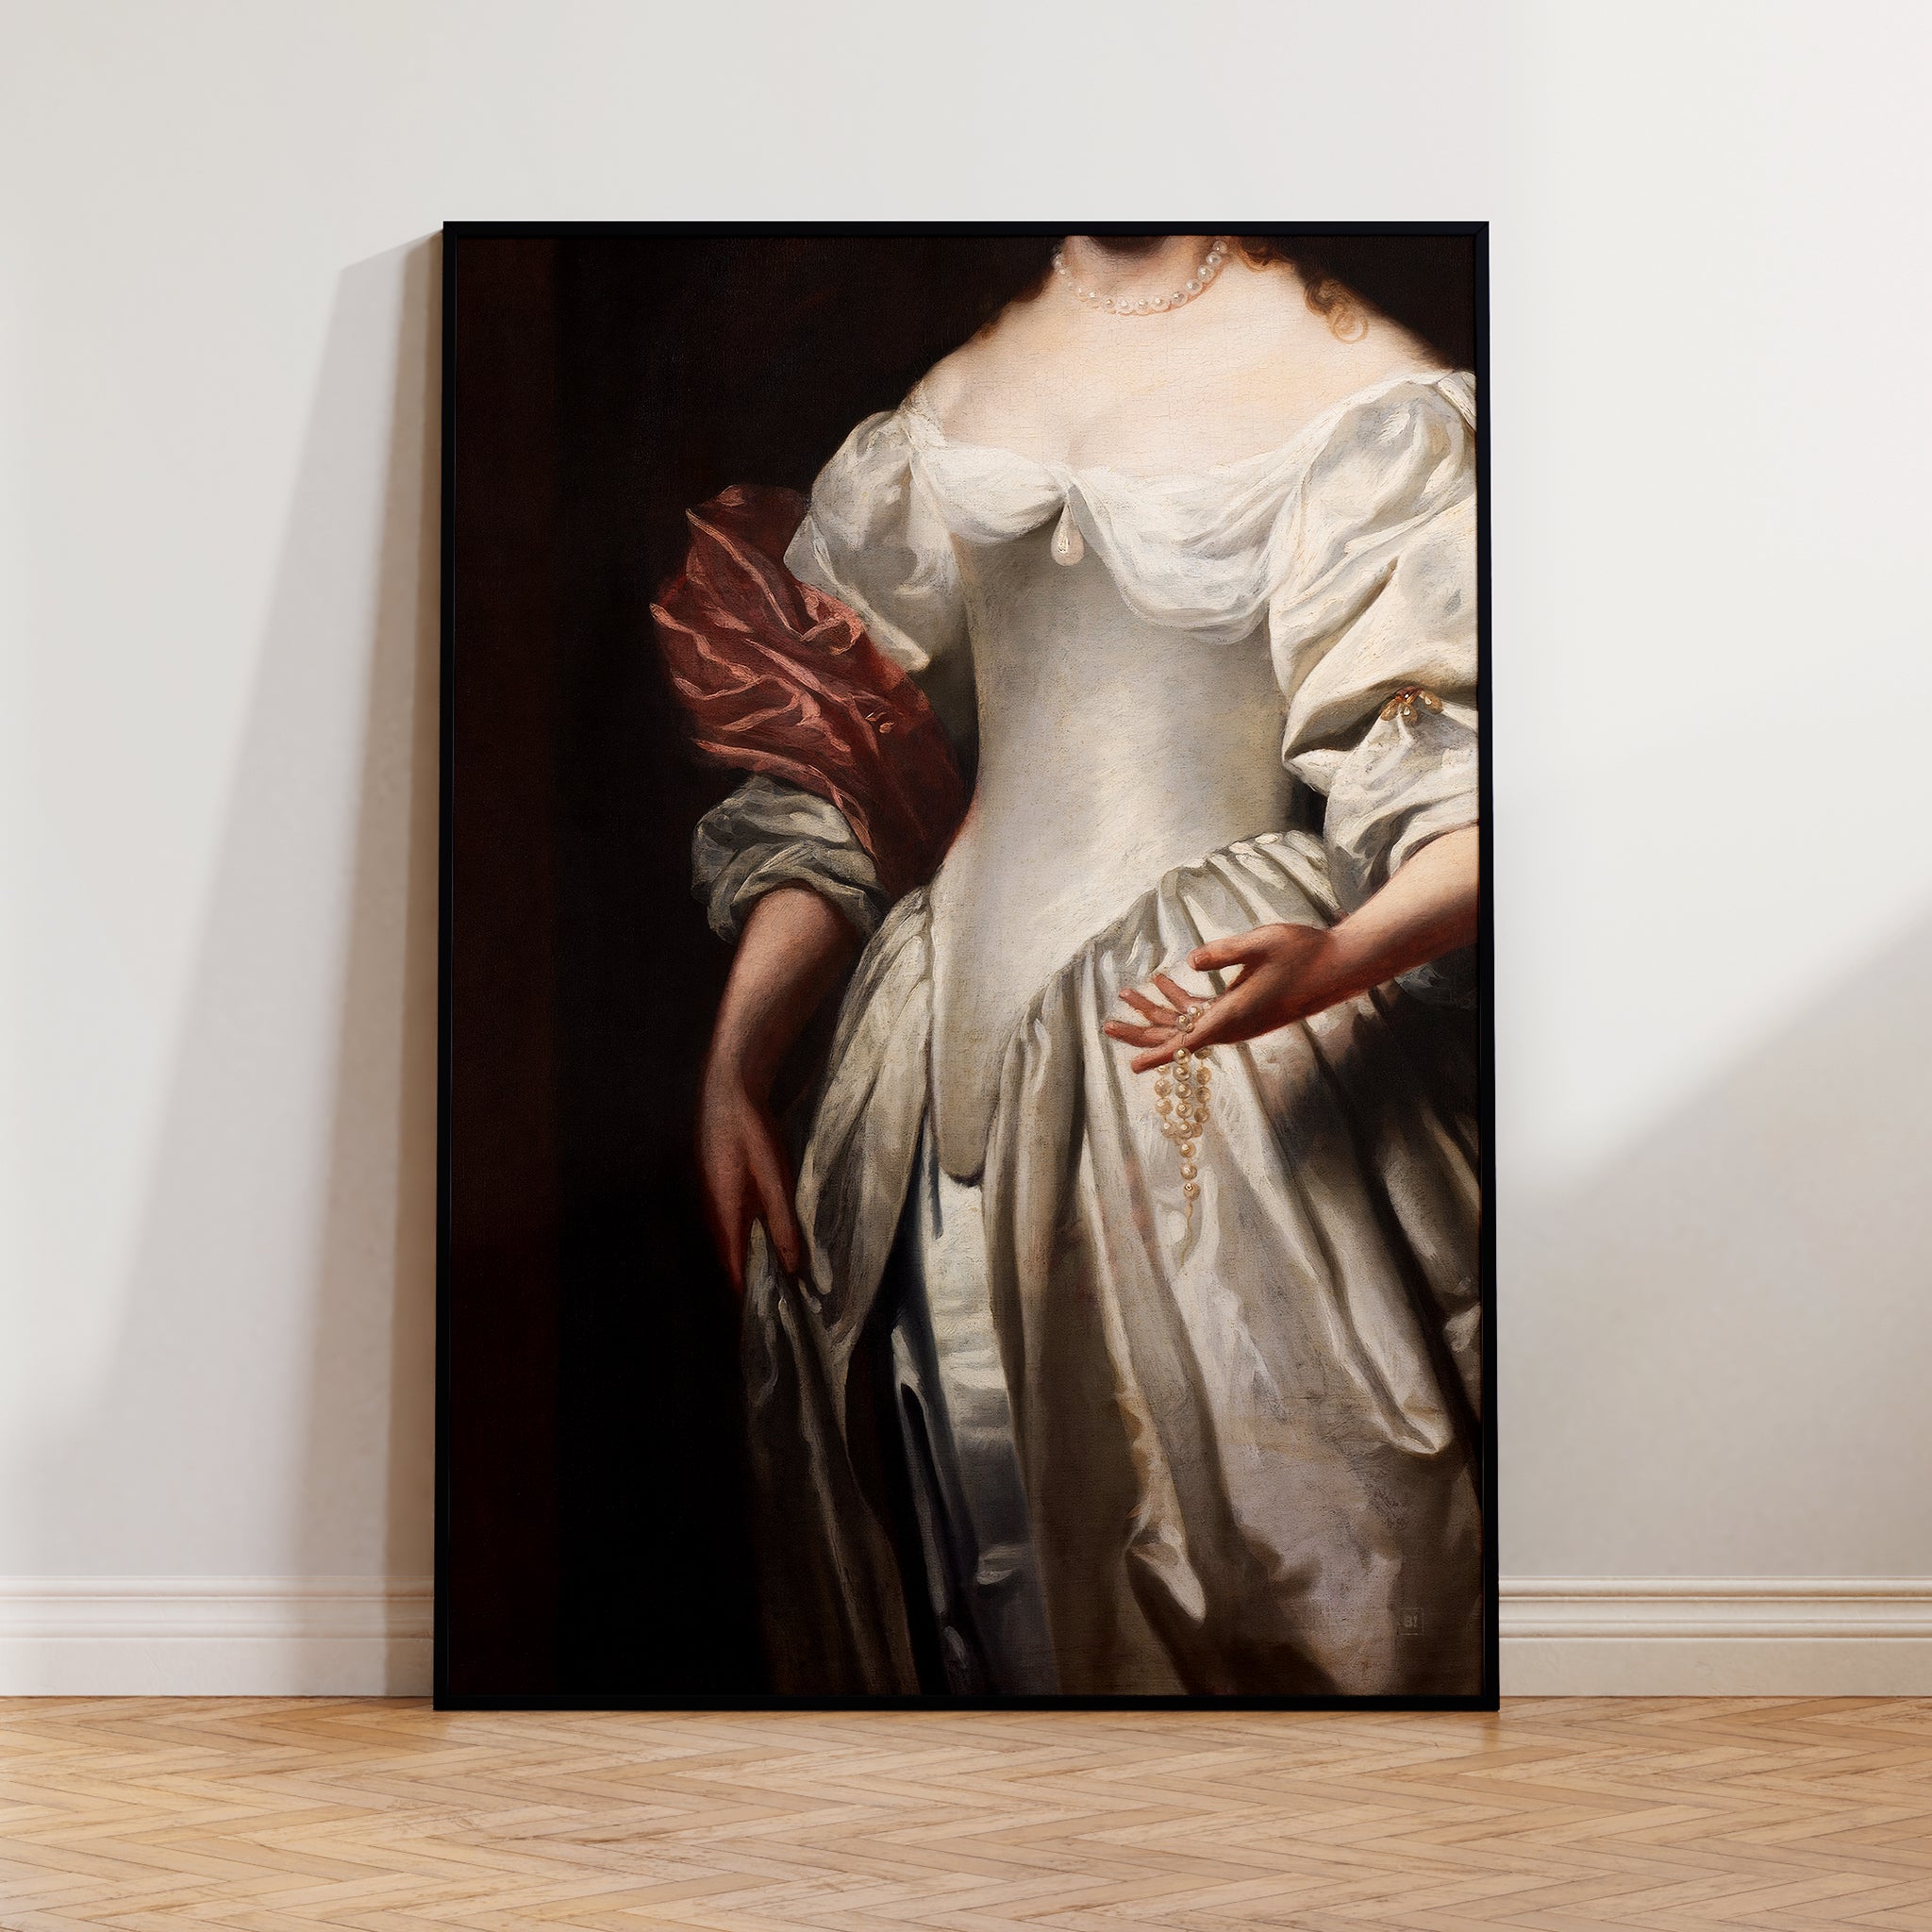 Be inspired by our altered Victorian Woman in White Satin Dress art print. This artwork was printed using the giclée process on archival acid-free paper and is presented in a modern black frame that captures its timeless beauty in every detail.